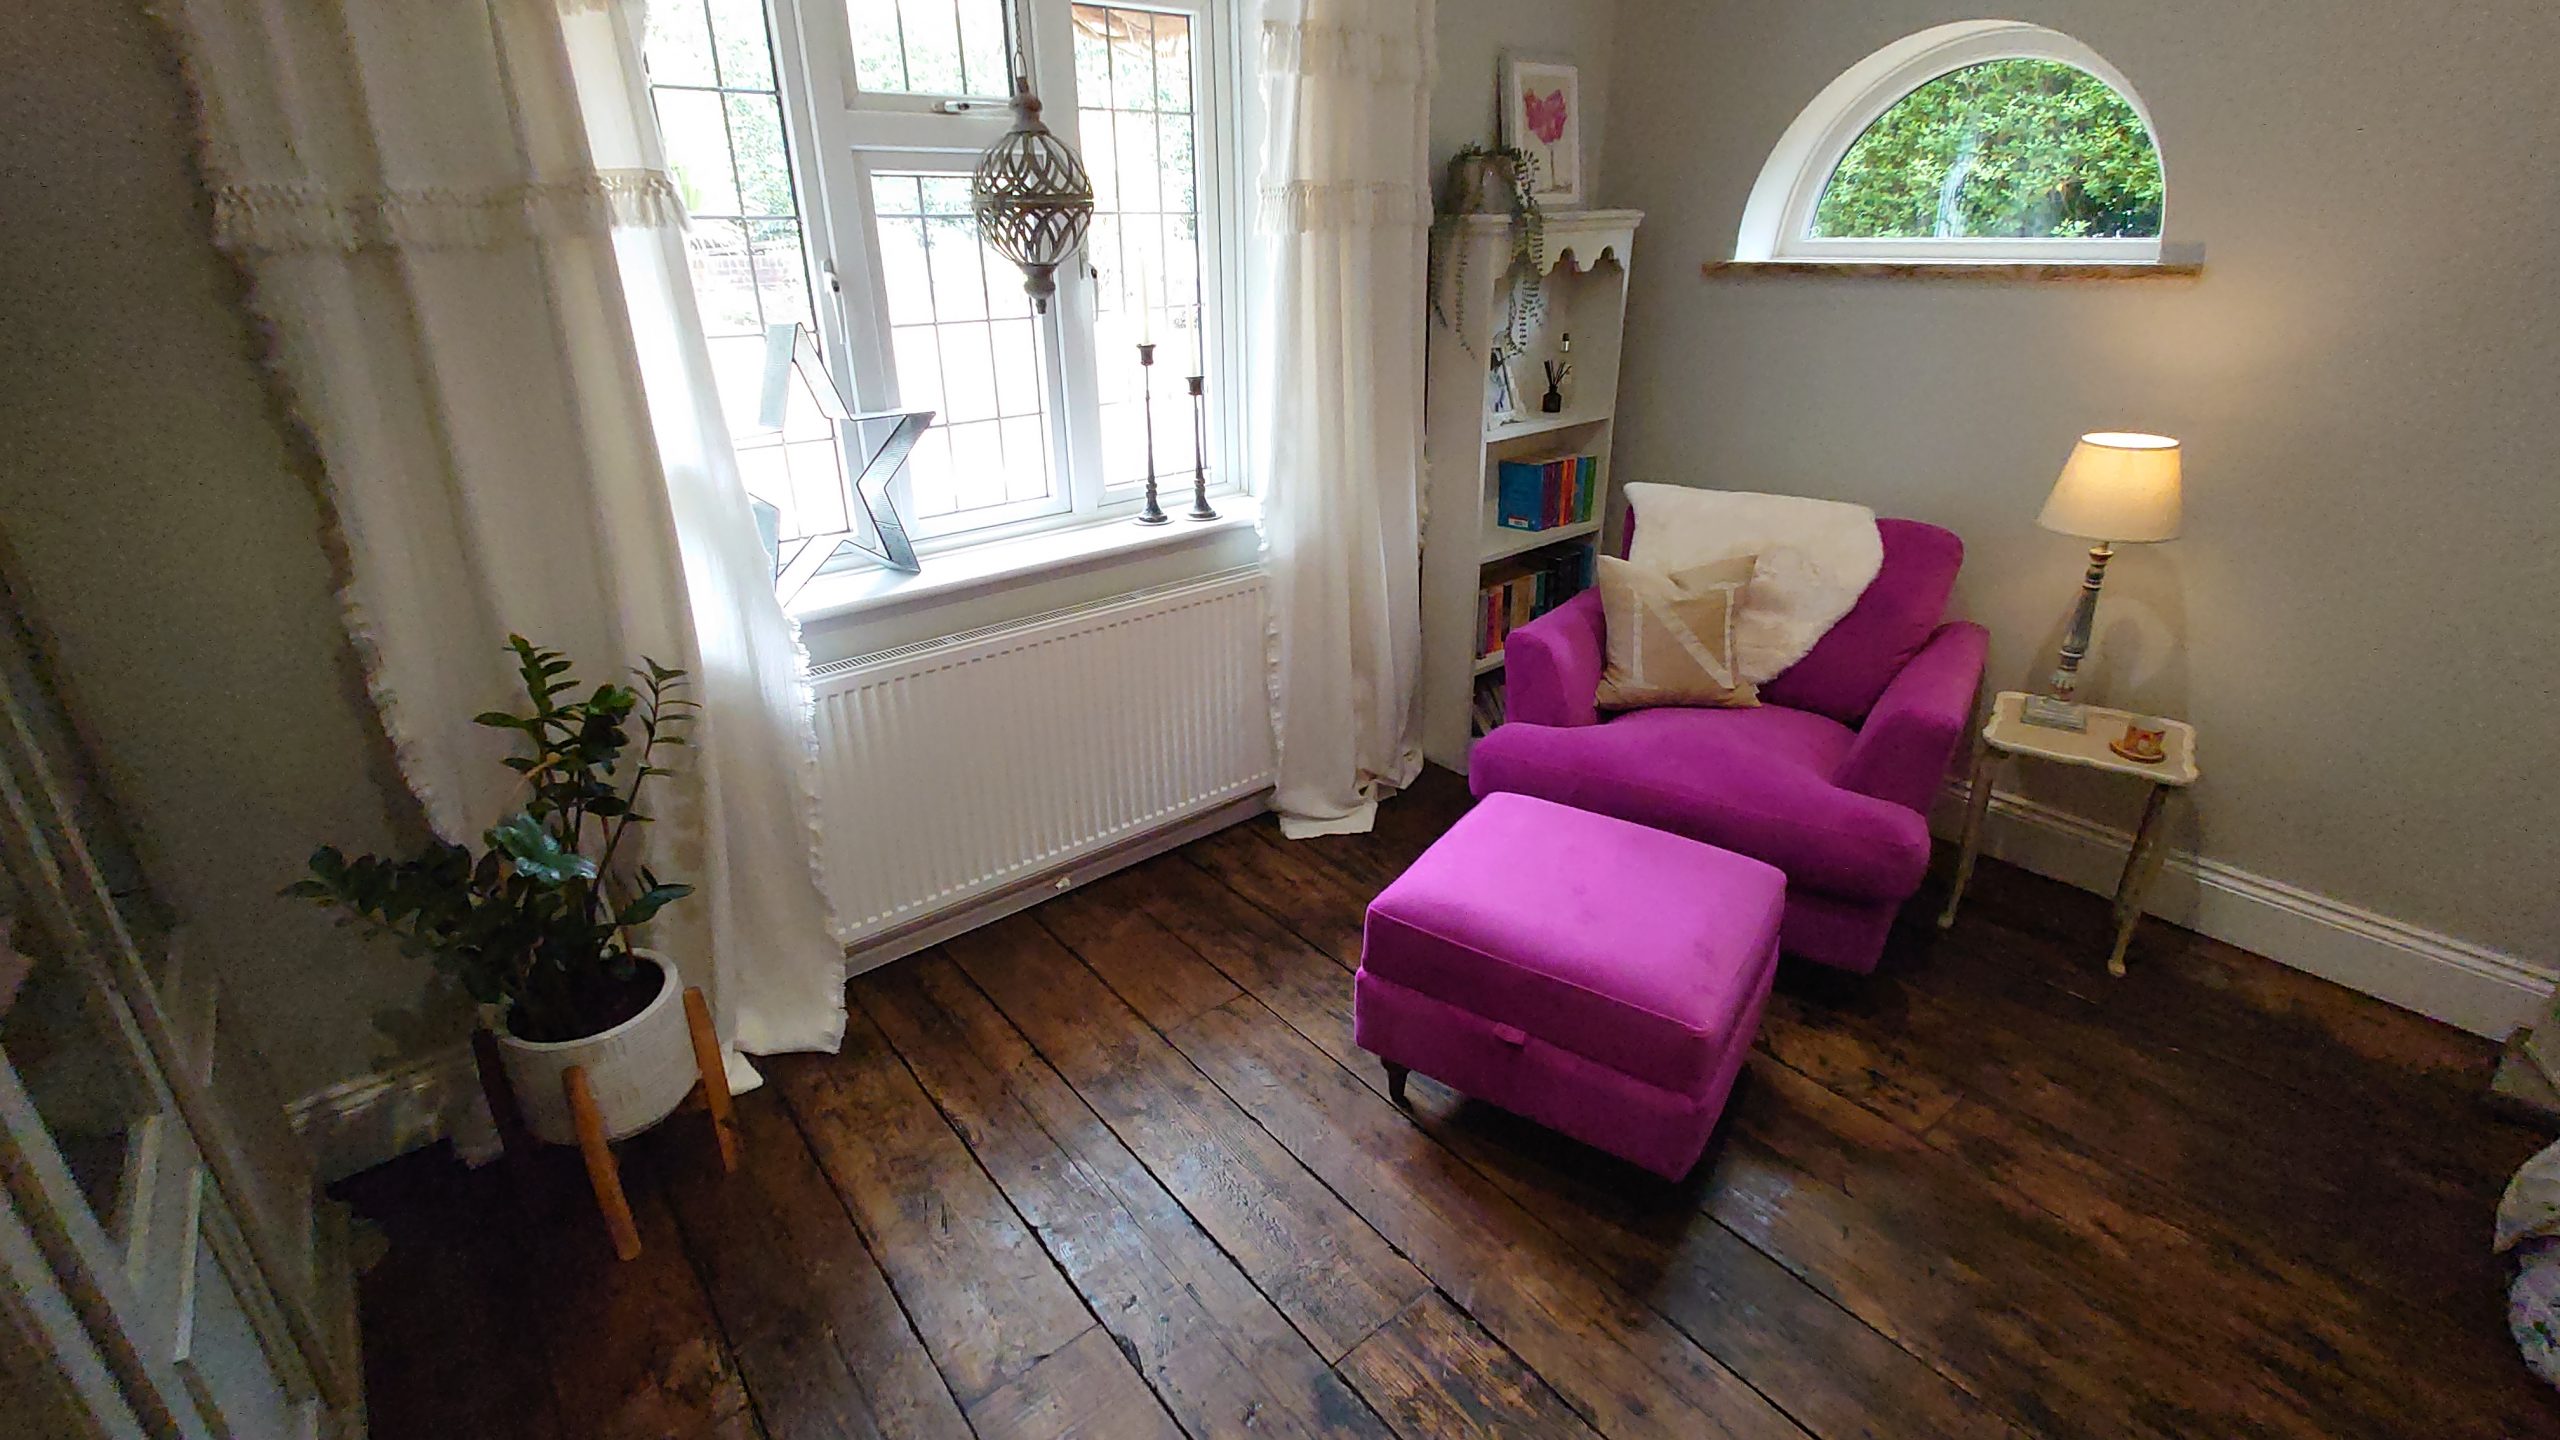 Reclaimed pine scaffold board flooring stained and treated to give the appearance of antique oak, in situ in a living room with a bright purple armchair and footstool in the corner